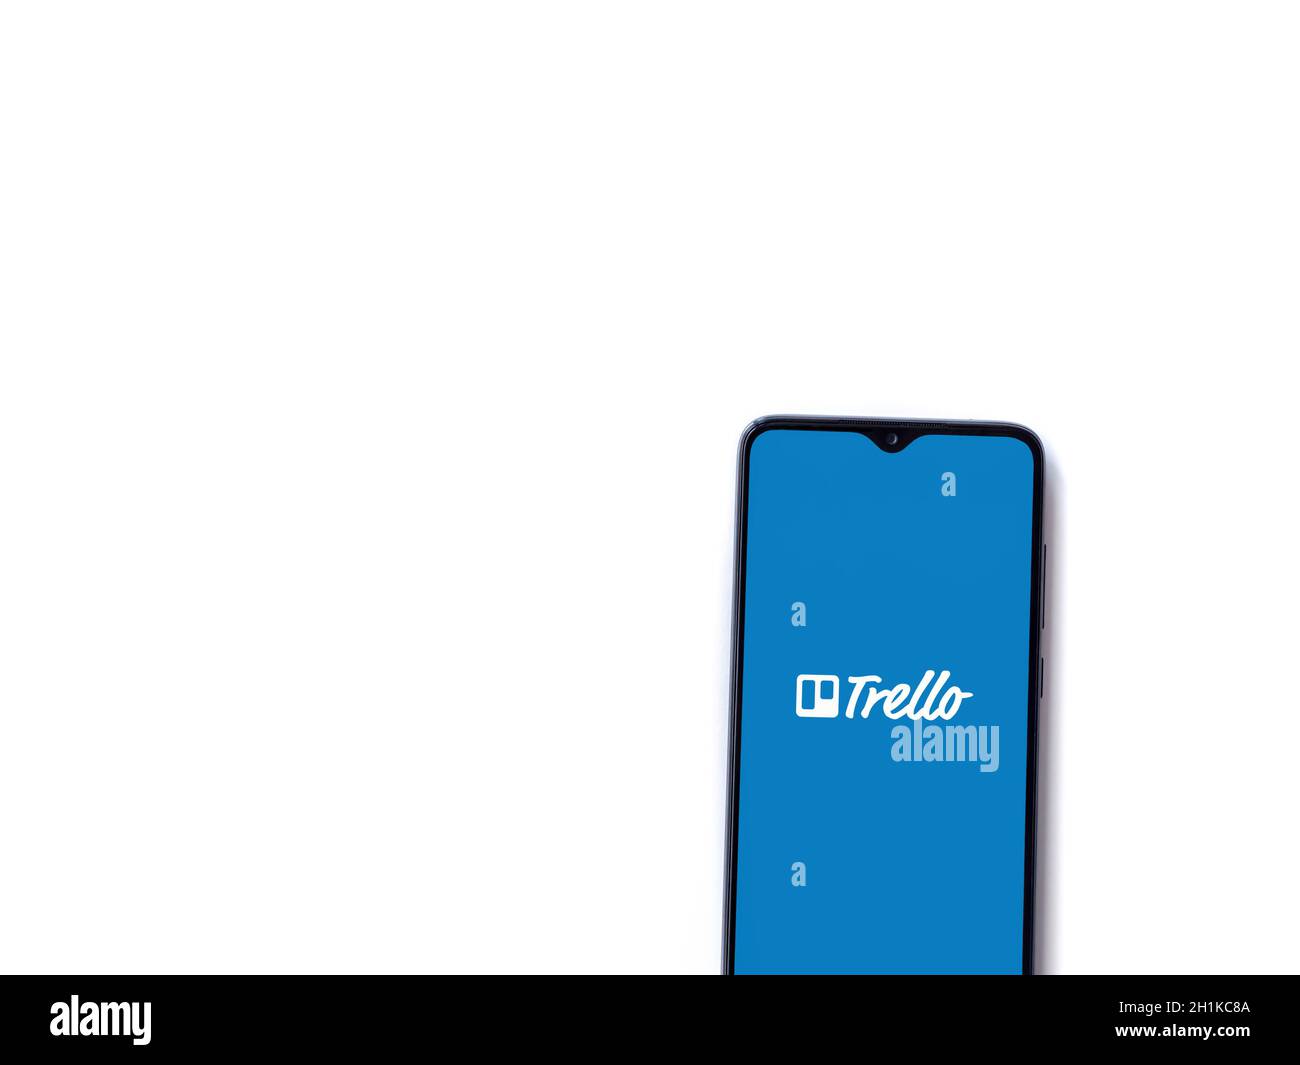 Lod, Israel - July 8, 2020: Trello app launch screen with logo on the display of a black mobile smartphone isolated on white background. Top view flat Stock Photo